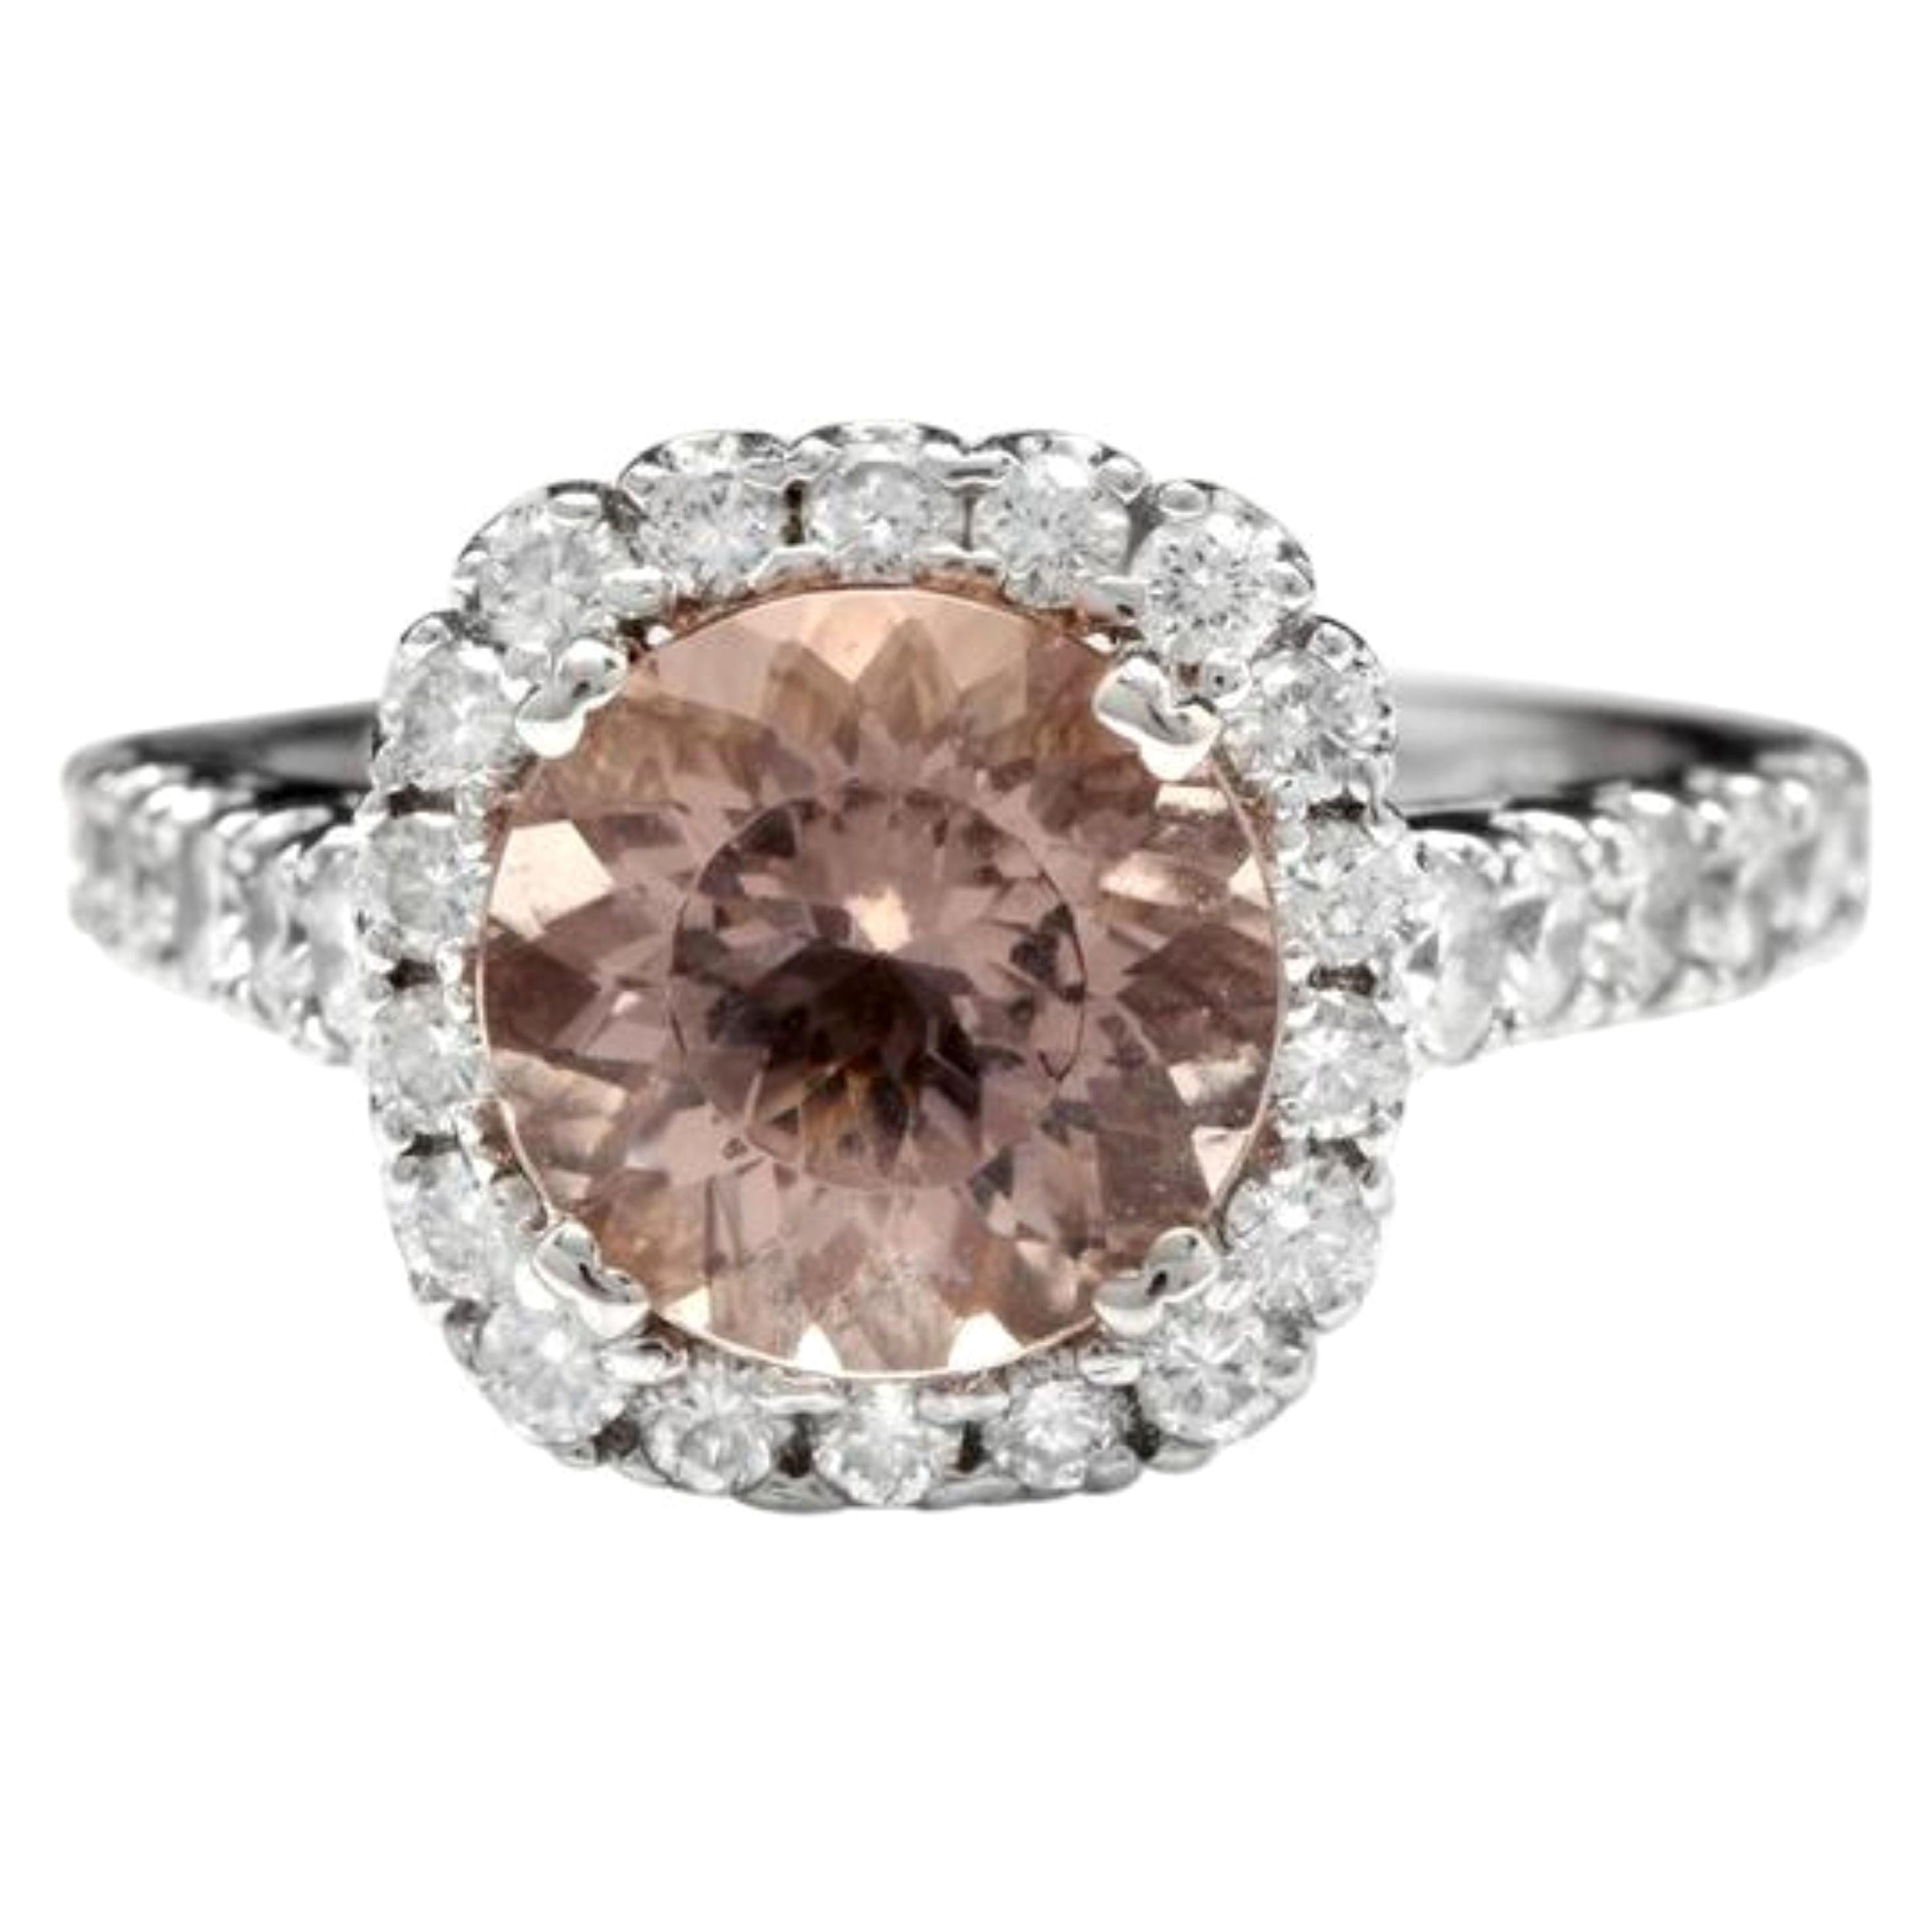 3.85 Carat Exquisite Natural Morganite and Diamond 14 Karat Solid Gold Ring For Sale